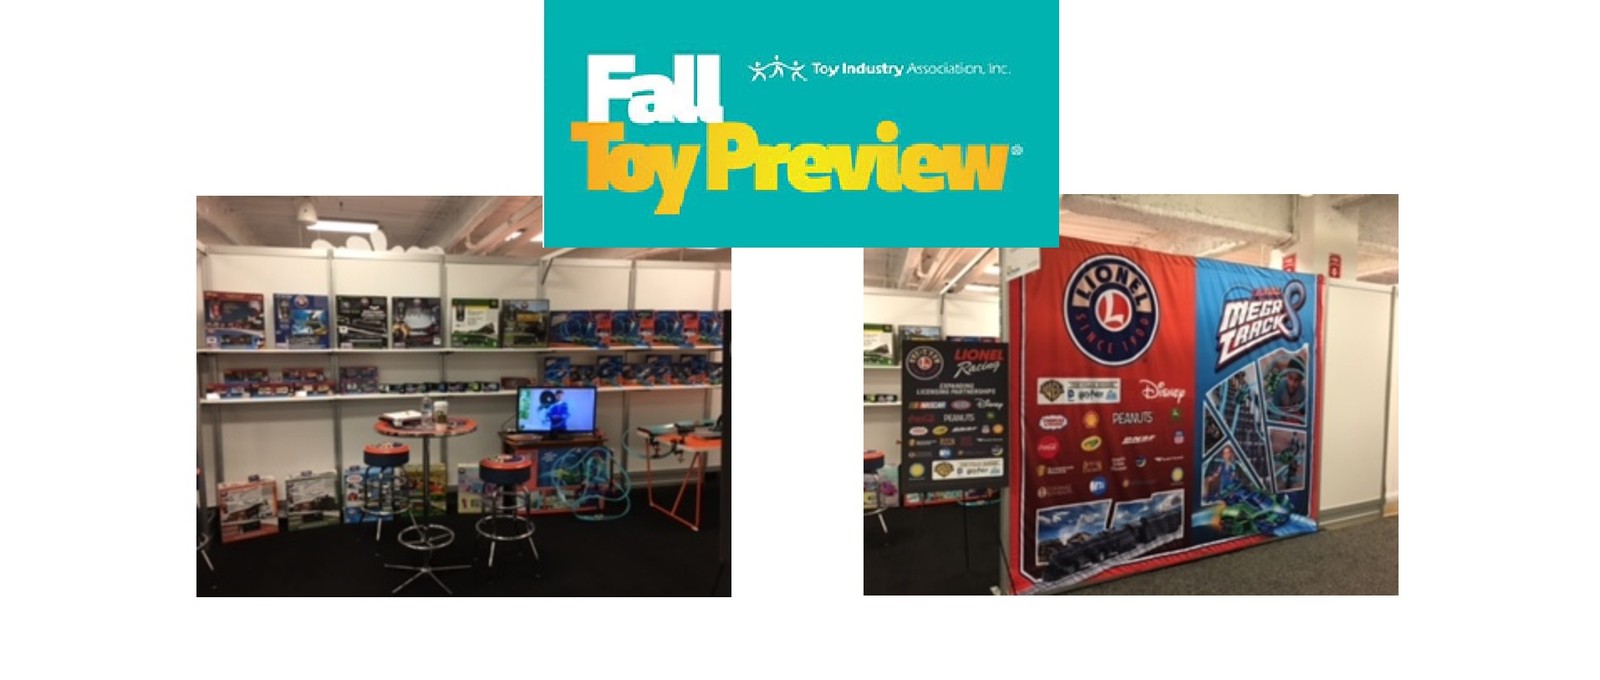 Lionel Showcases New Product at Dallas Fall Toy Preview